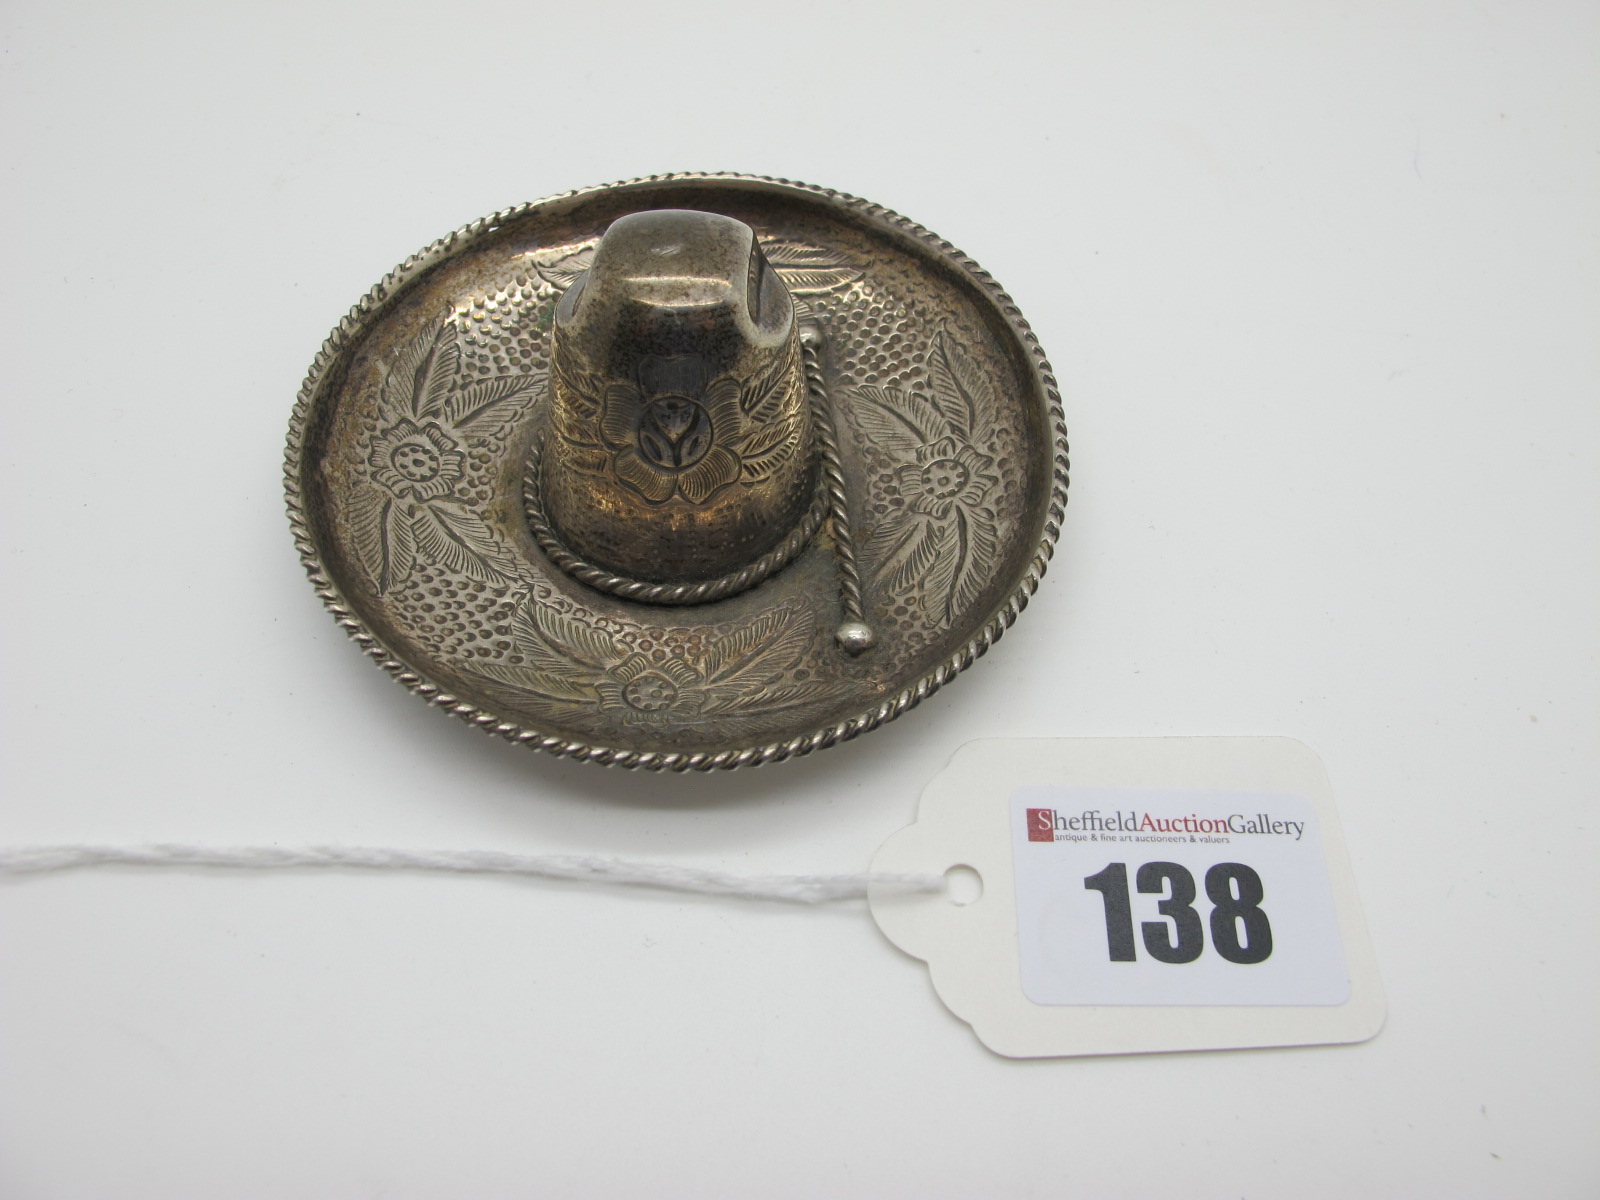 A Novelty Mexican Sombrero Hat, stamped "Sterling Mexico", 8.5cm diameter.